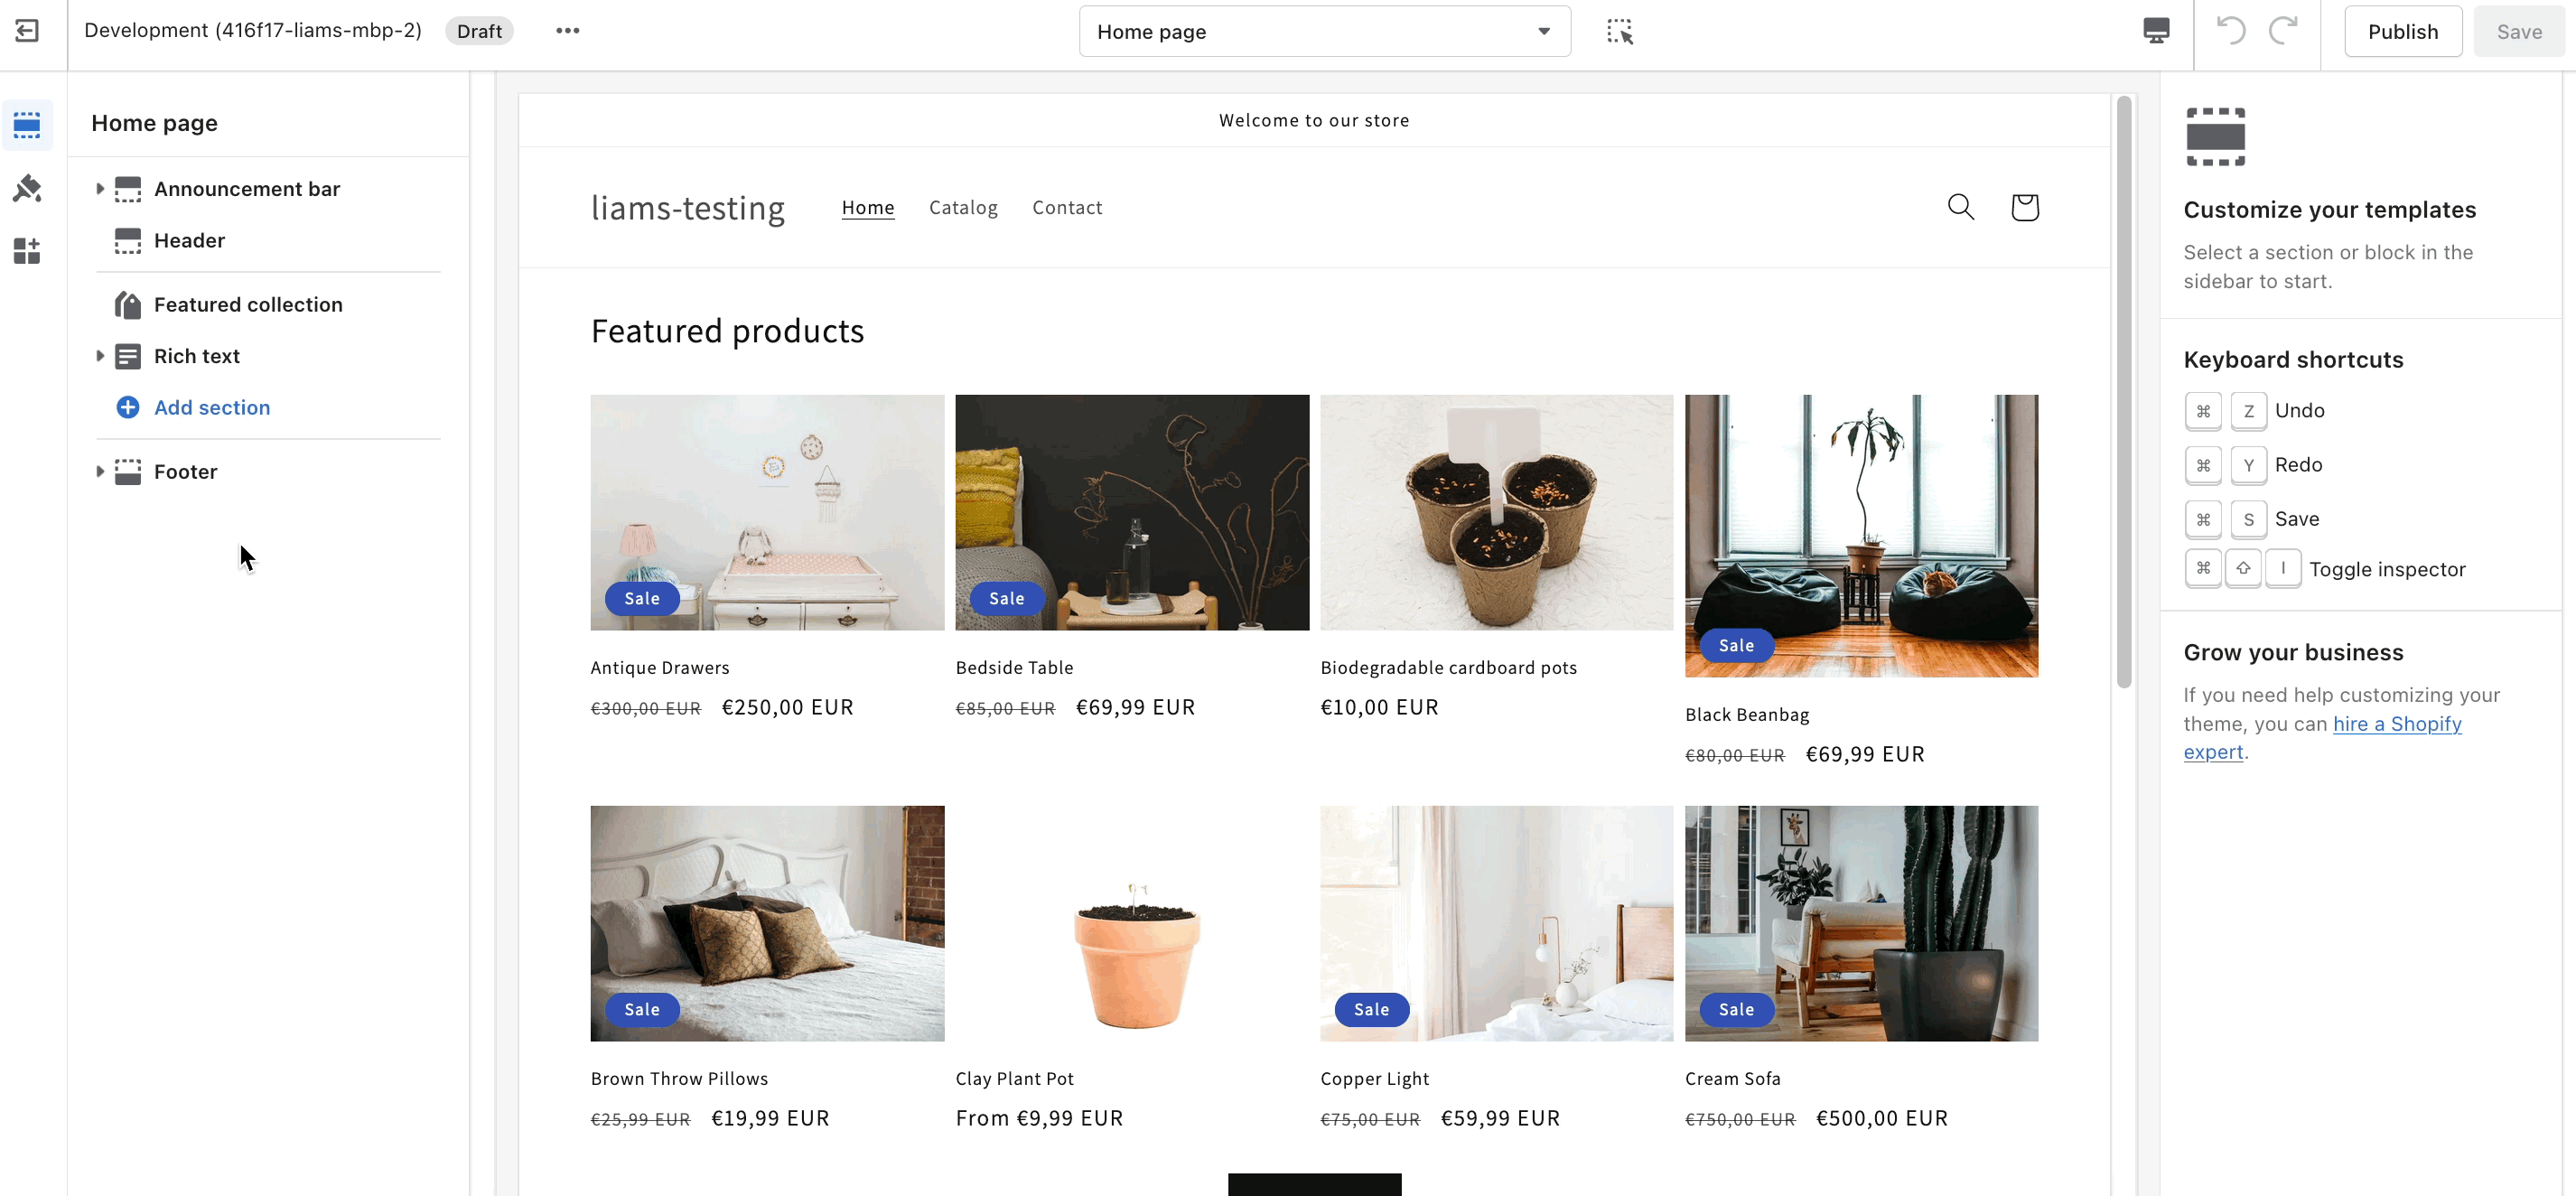 how to add video to shopify homepage